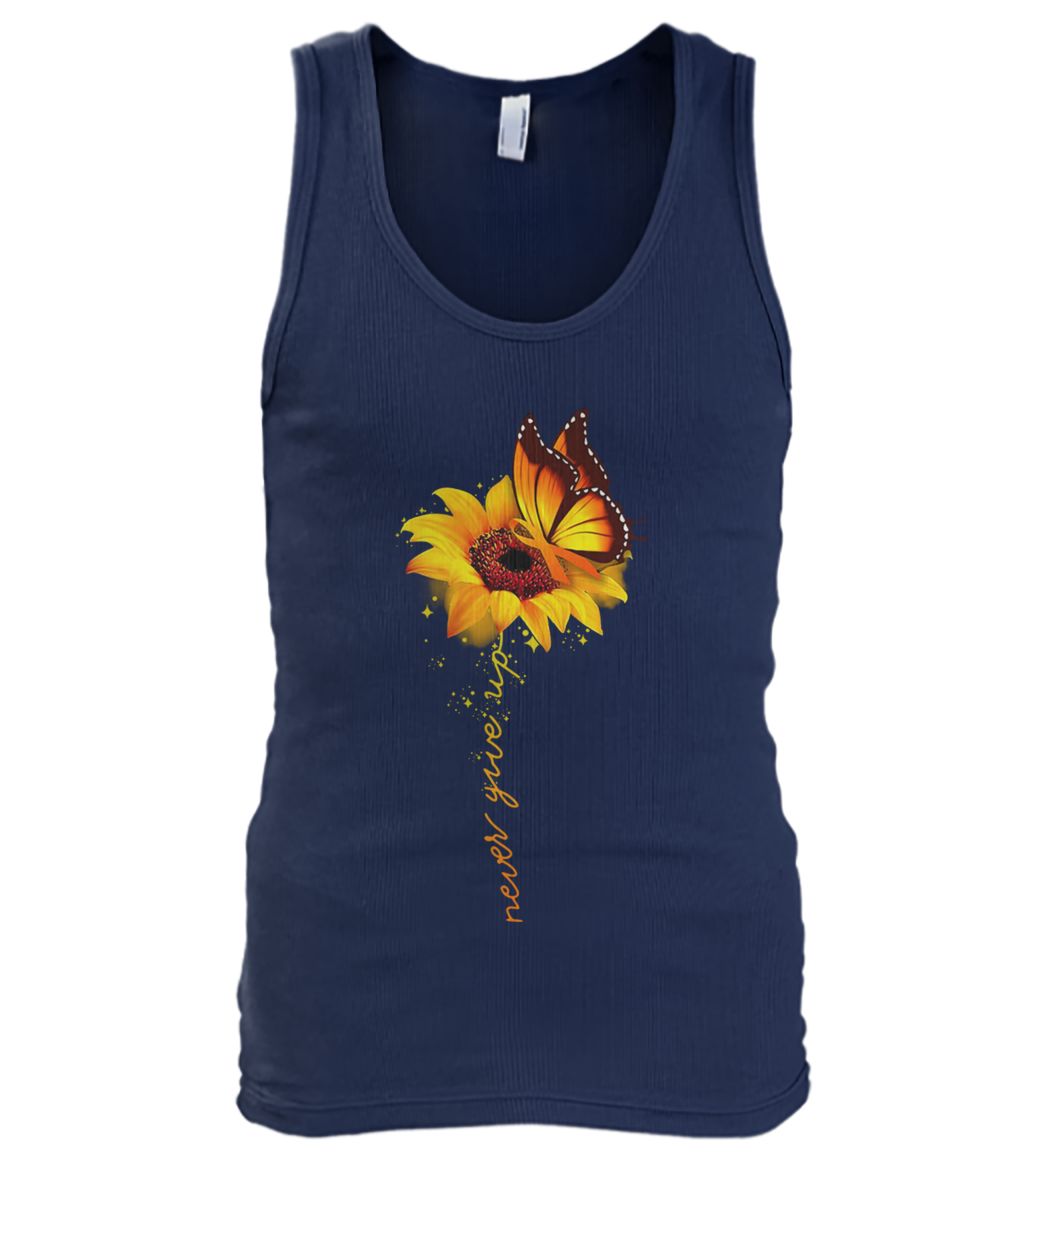 Sunflower butterfly never give up raise multiple sclerosis awareness men's tank top